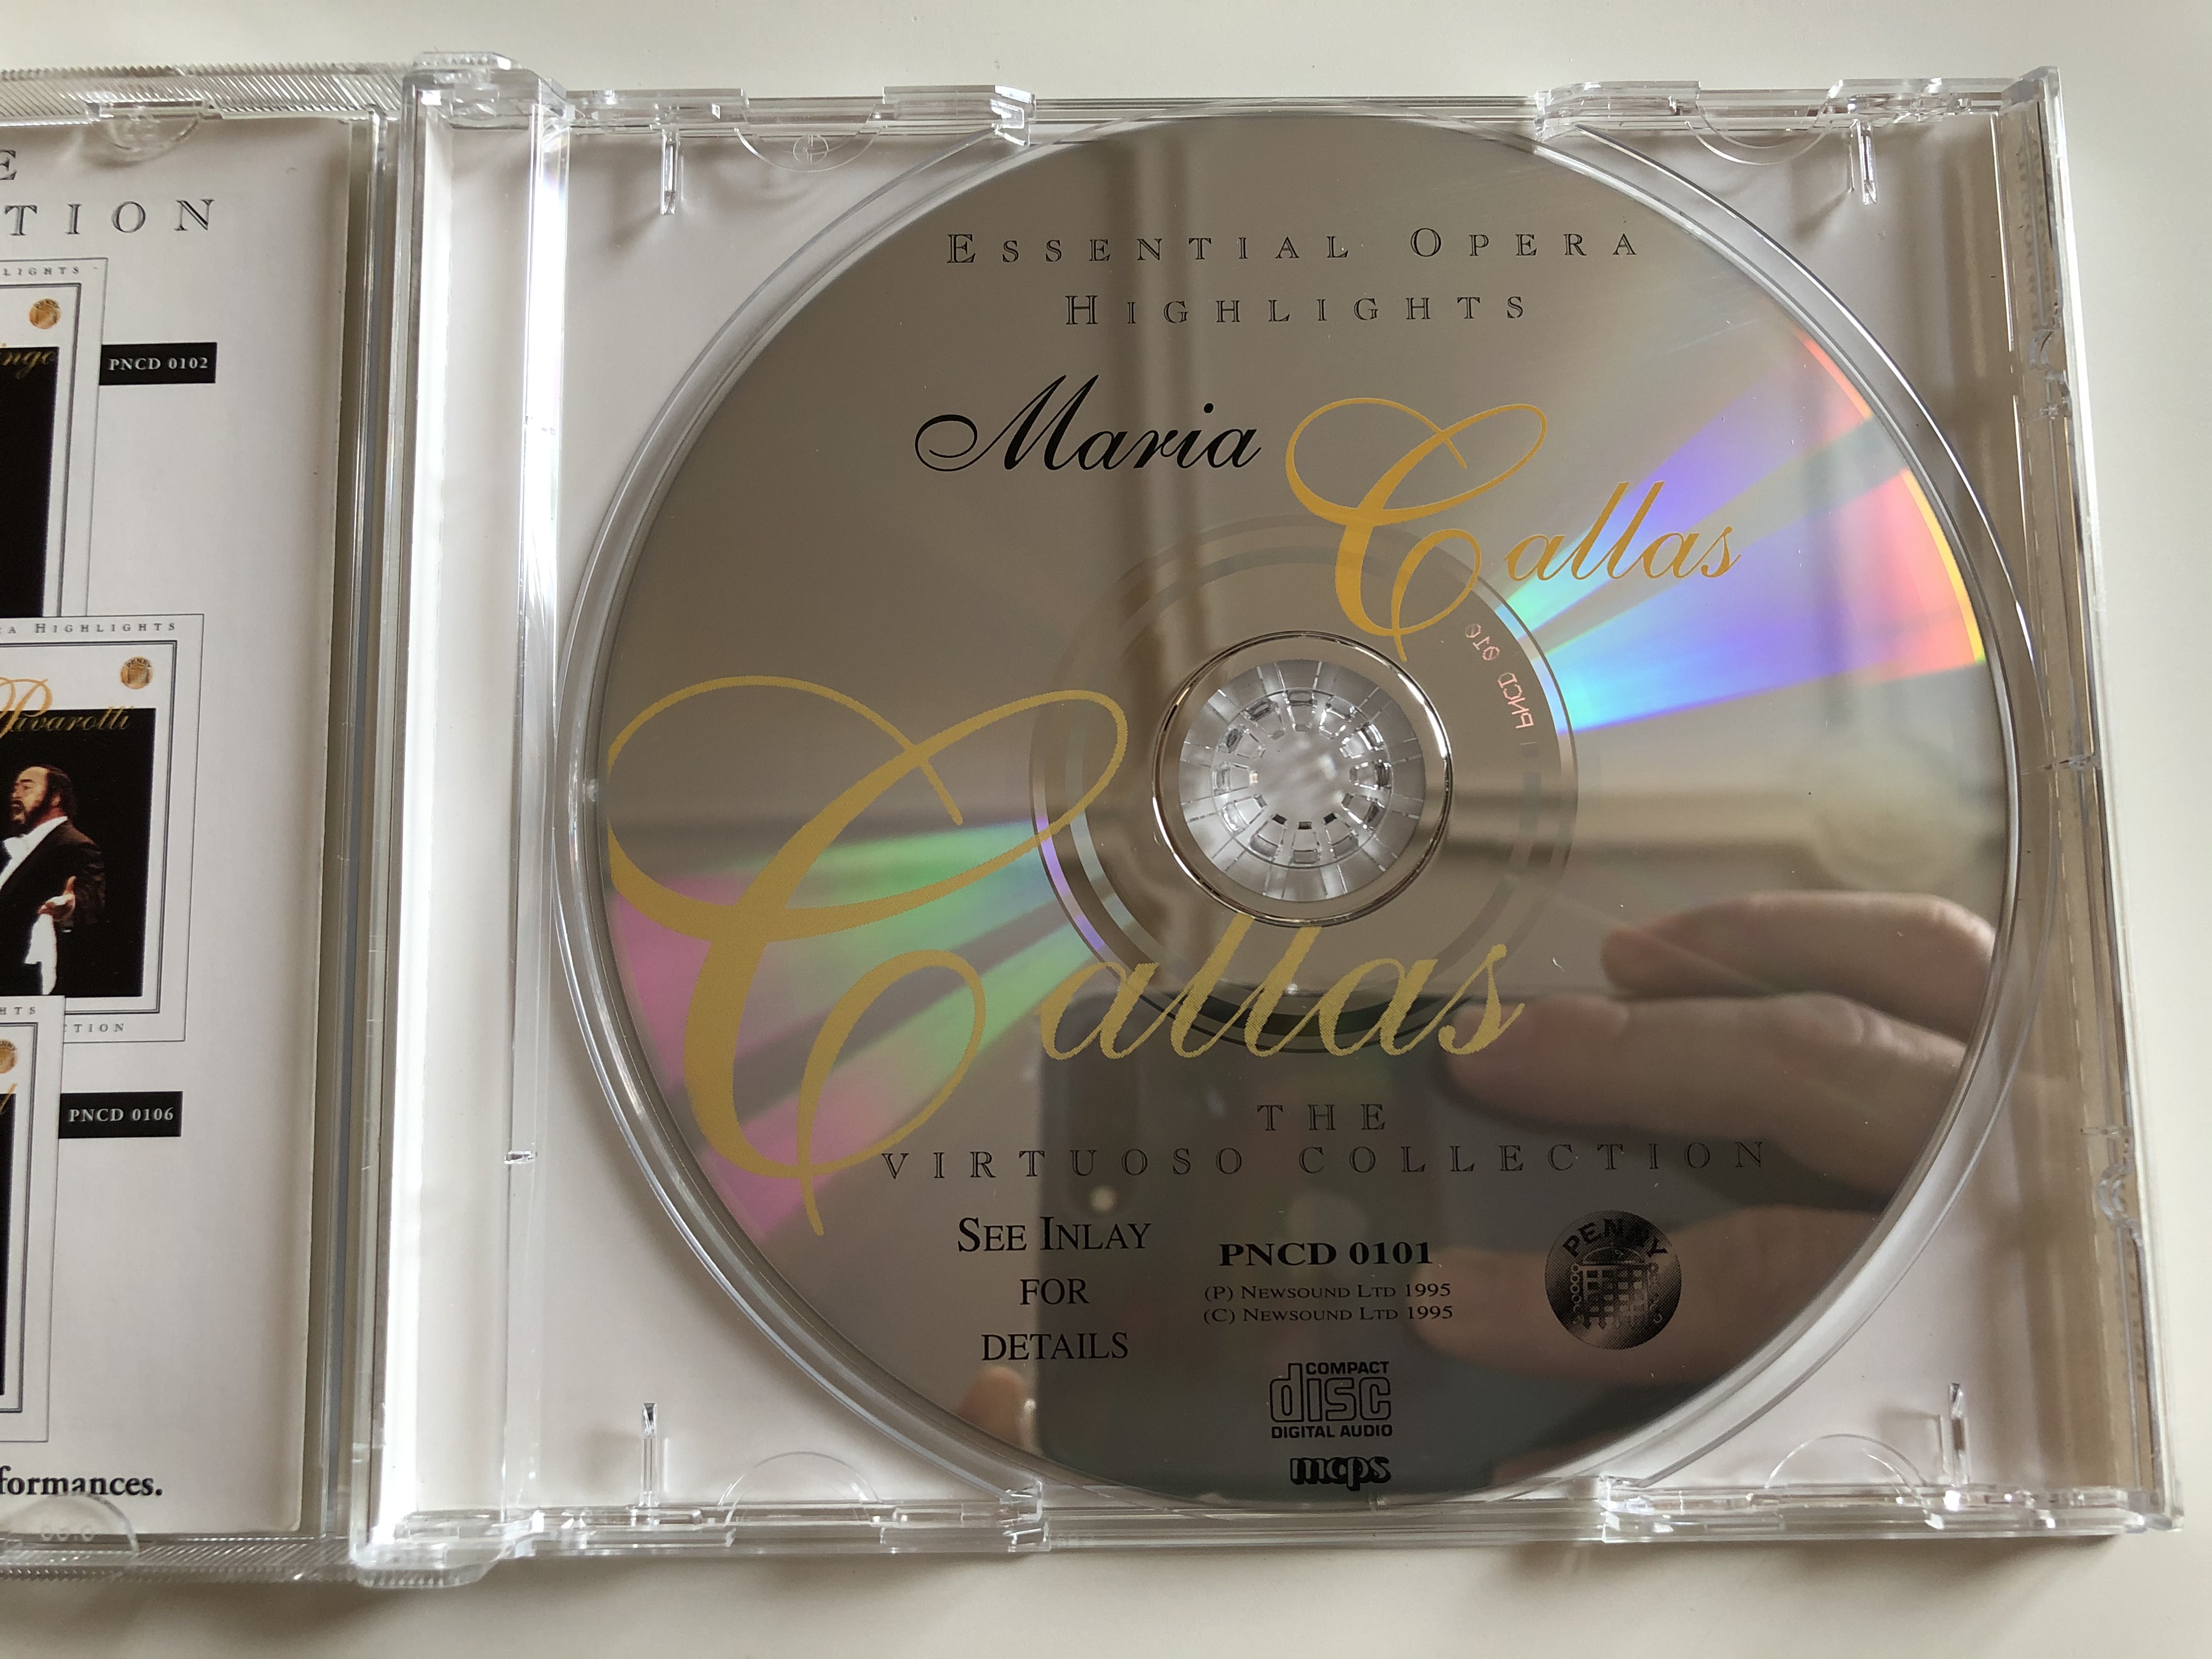 maria-callas-the-virtuoso-collection-essential-opera-highlights-penny-audio-cd-1995-pncd-0101-3-.jpg